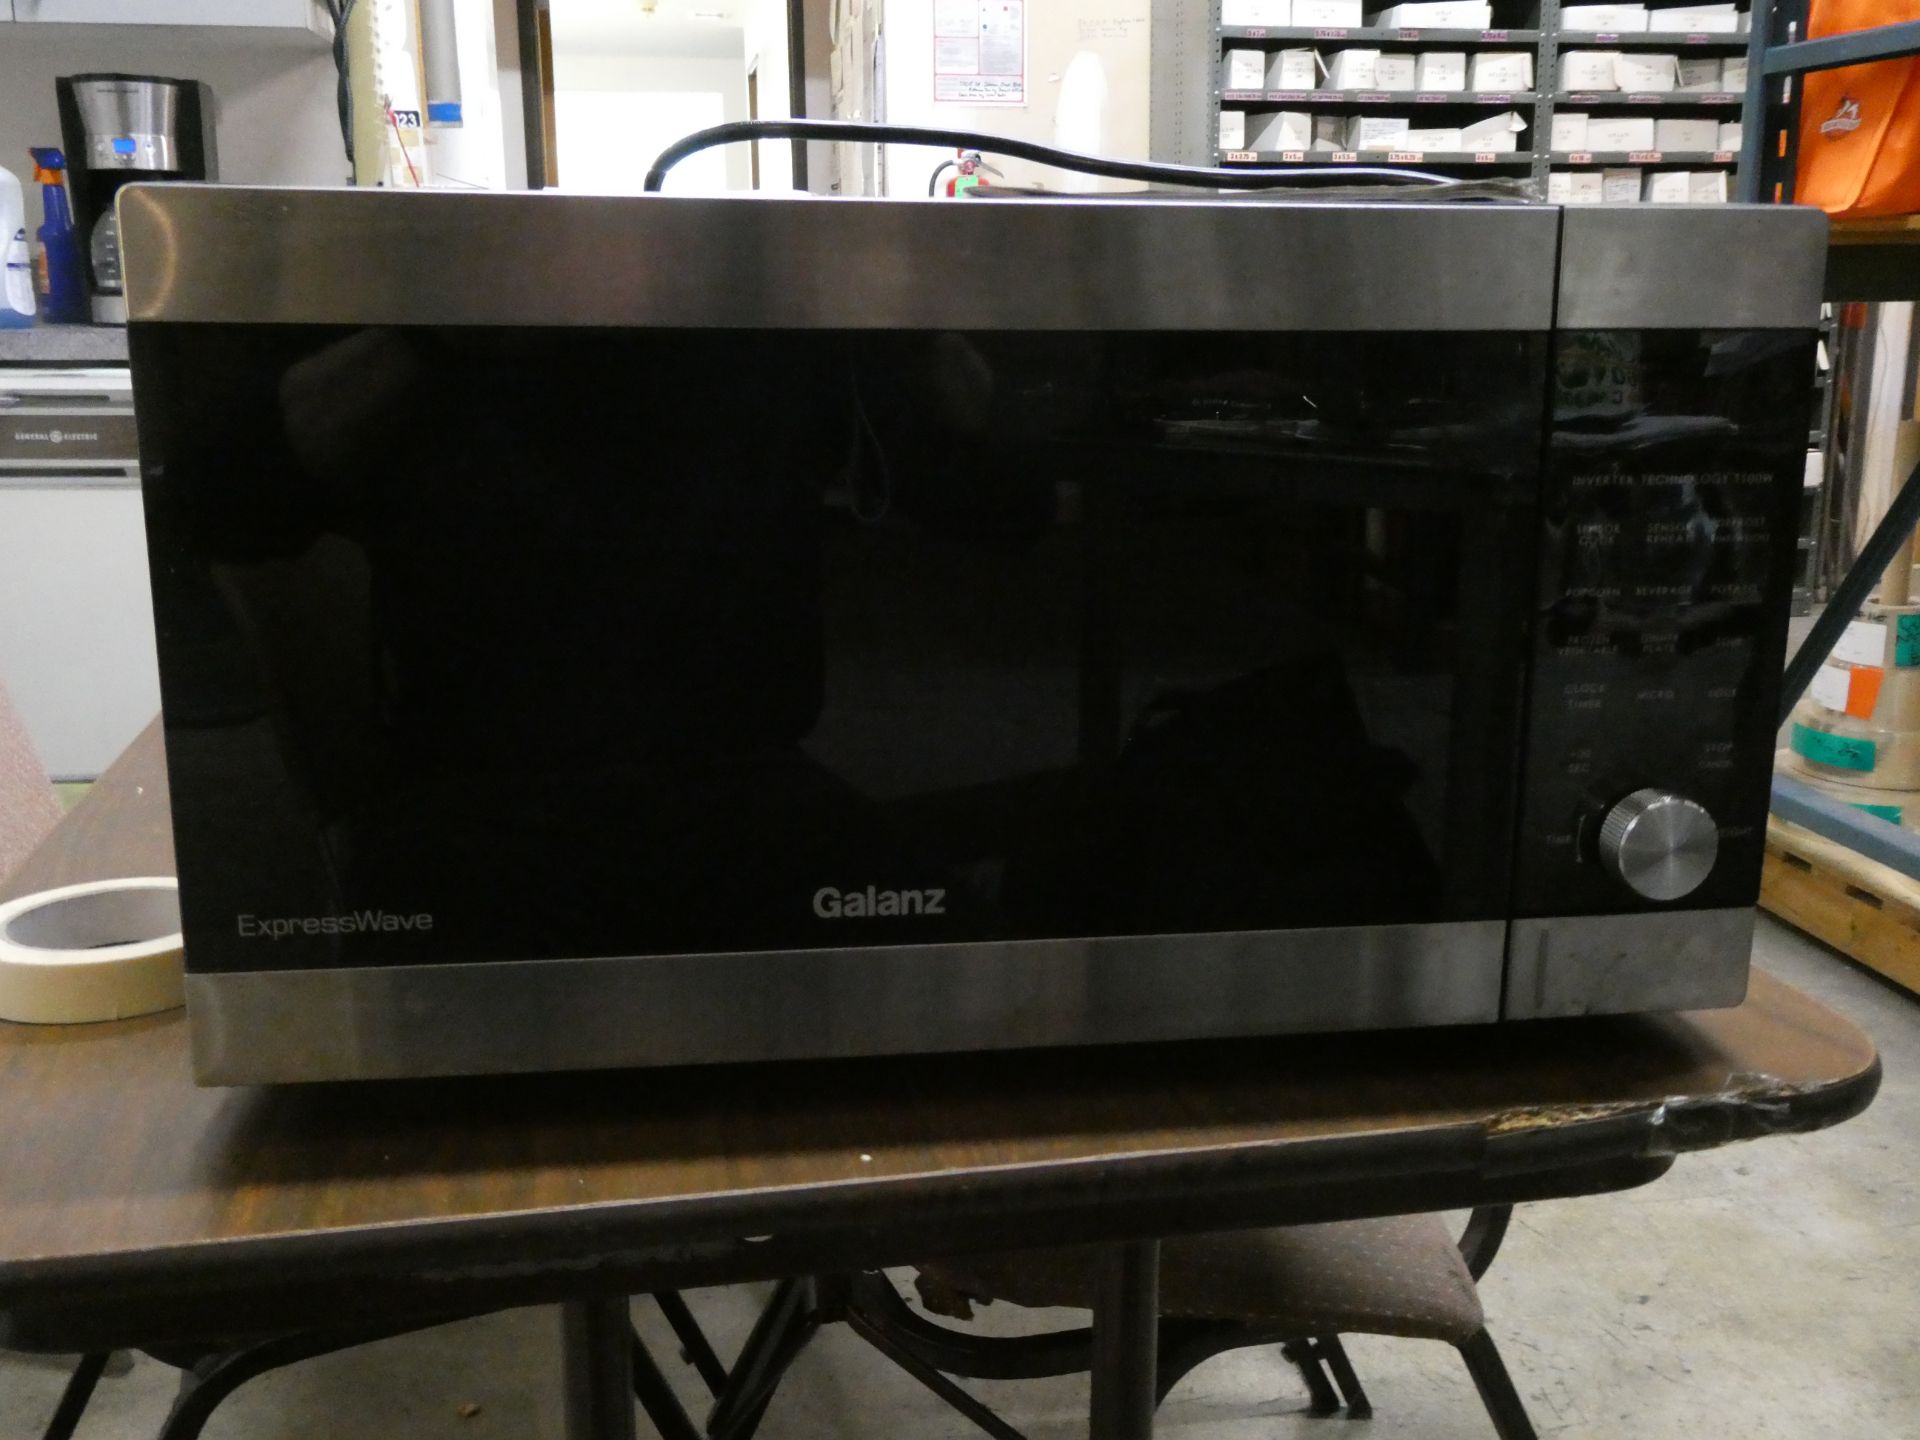 Galanz Express Wave Micro Wave Oven